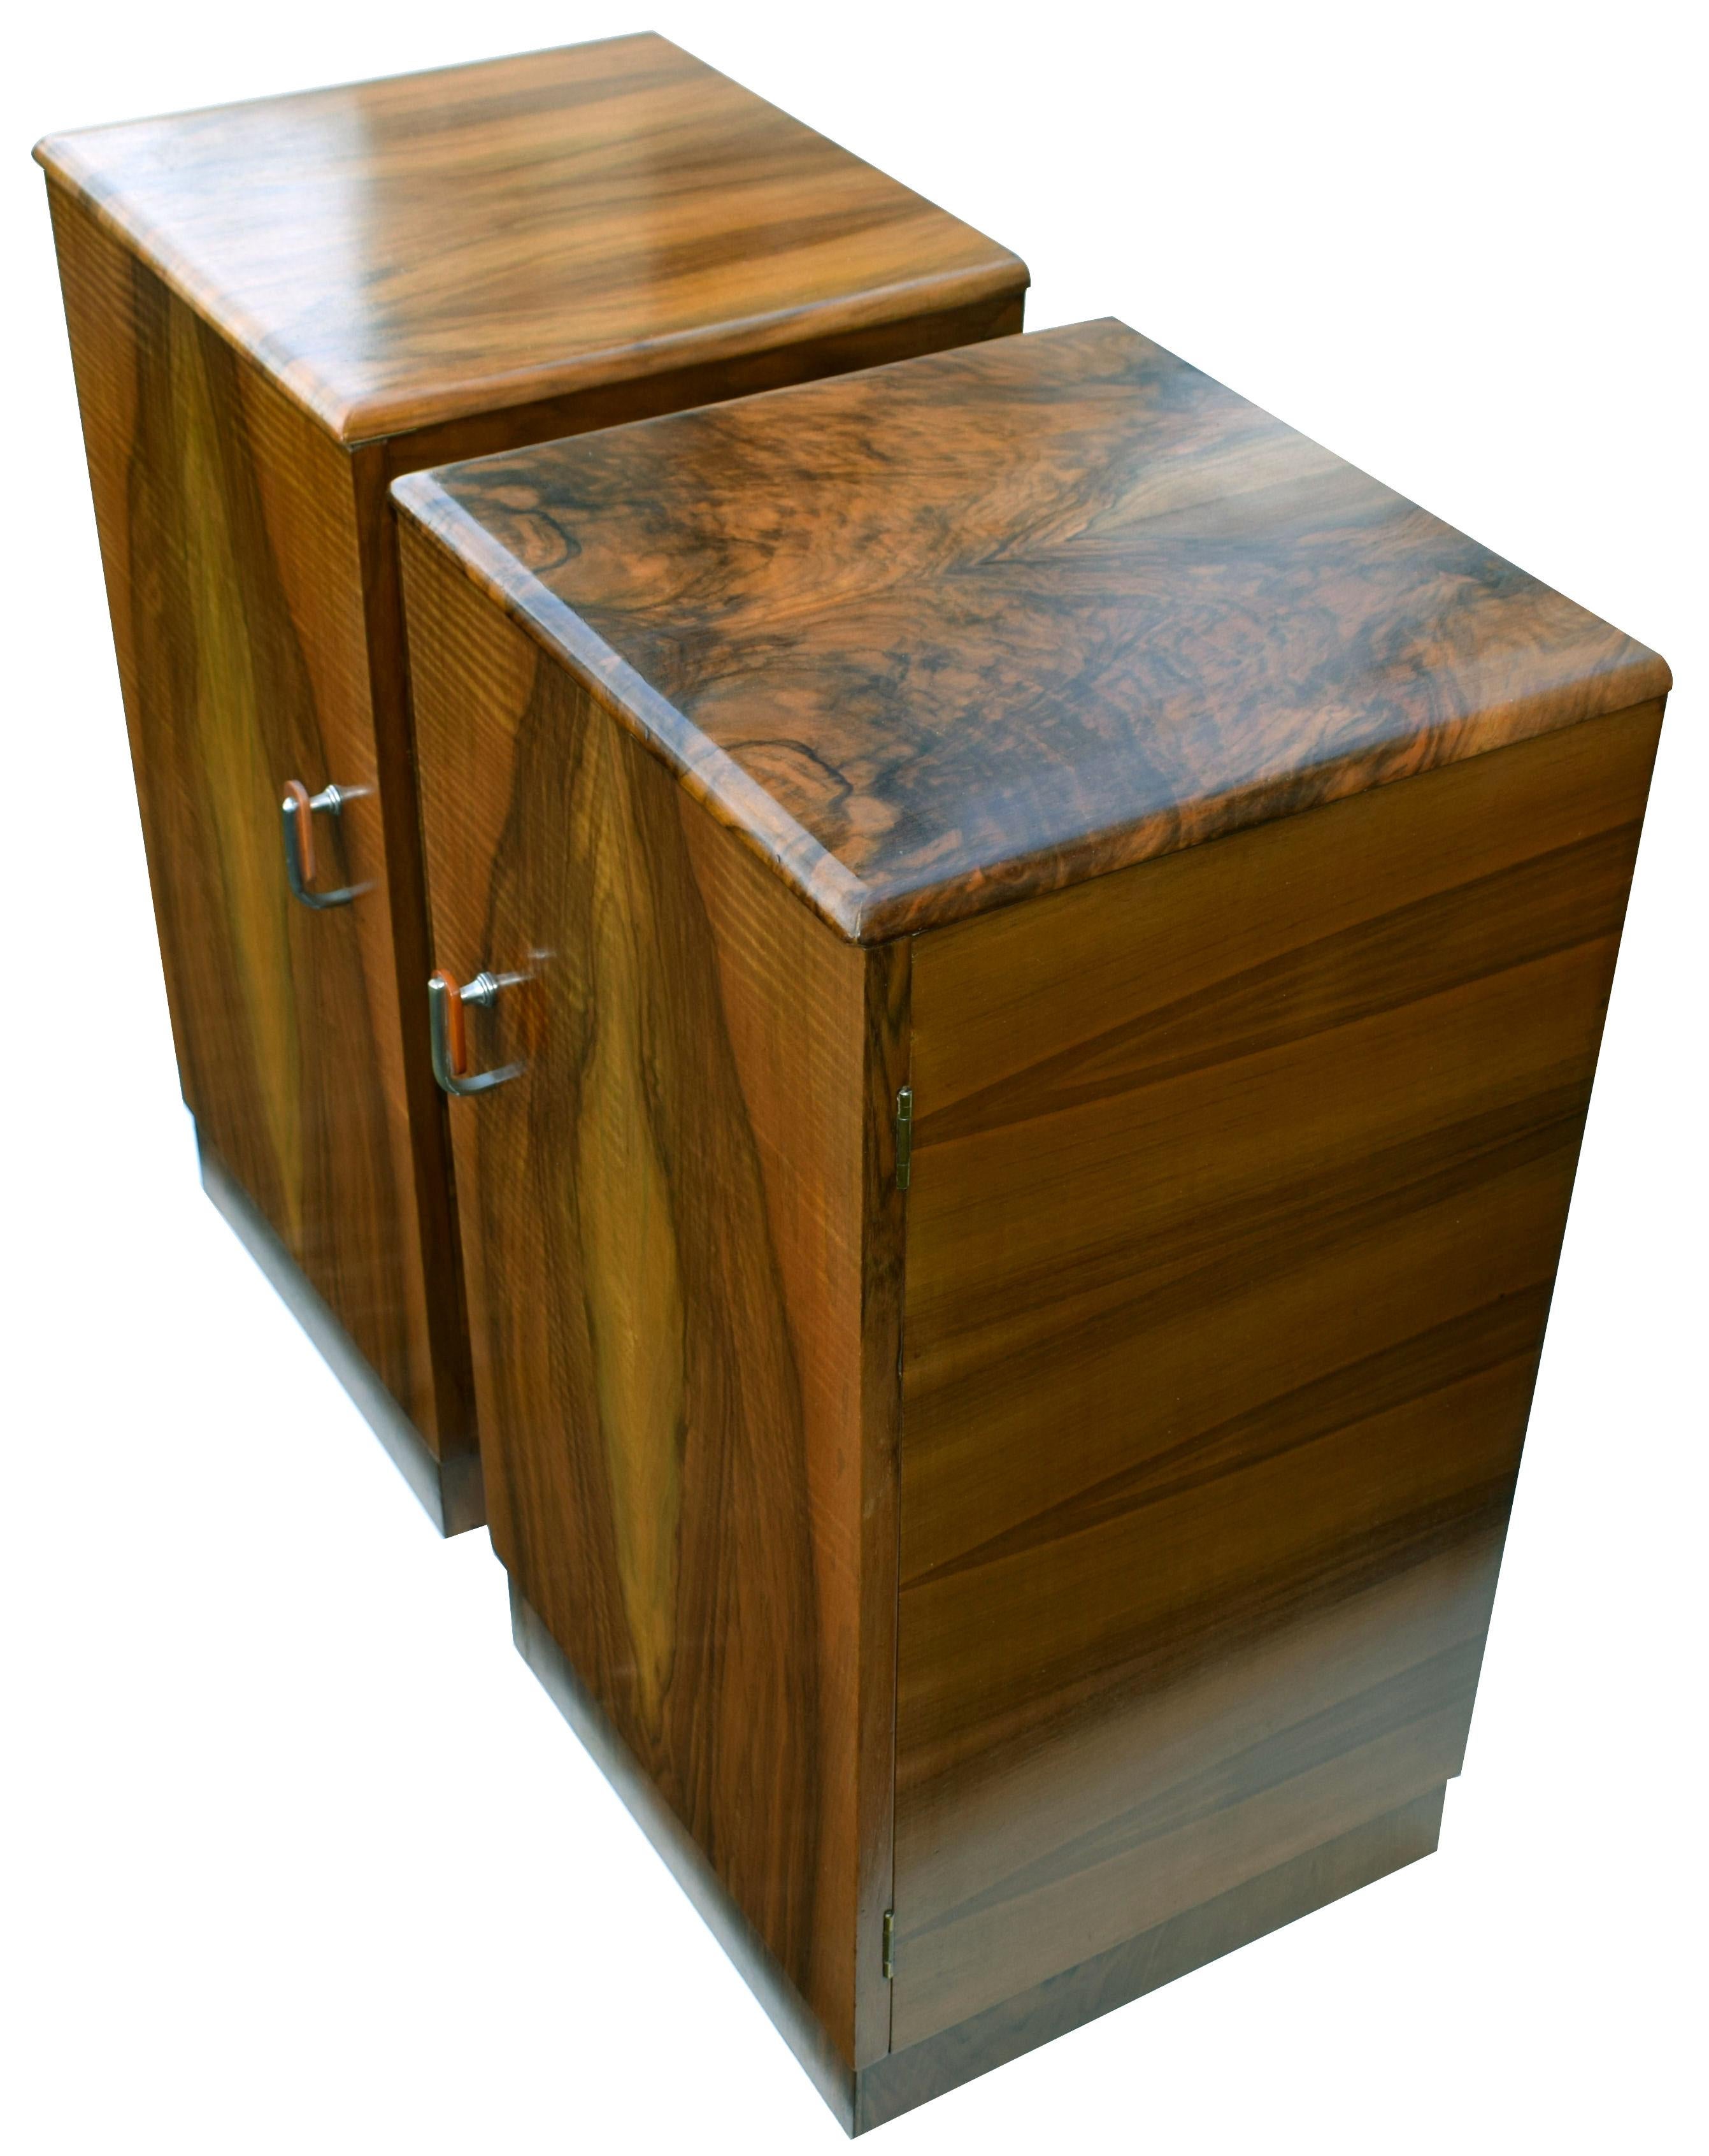 Fabulous pair of matching 1930s Art Deco bedside tables in attractively figured walnut veneer. Two generously sized internal storage areas. We've had both cabinets fully and professionally restored and so come to you in excellent condition. Both